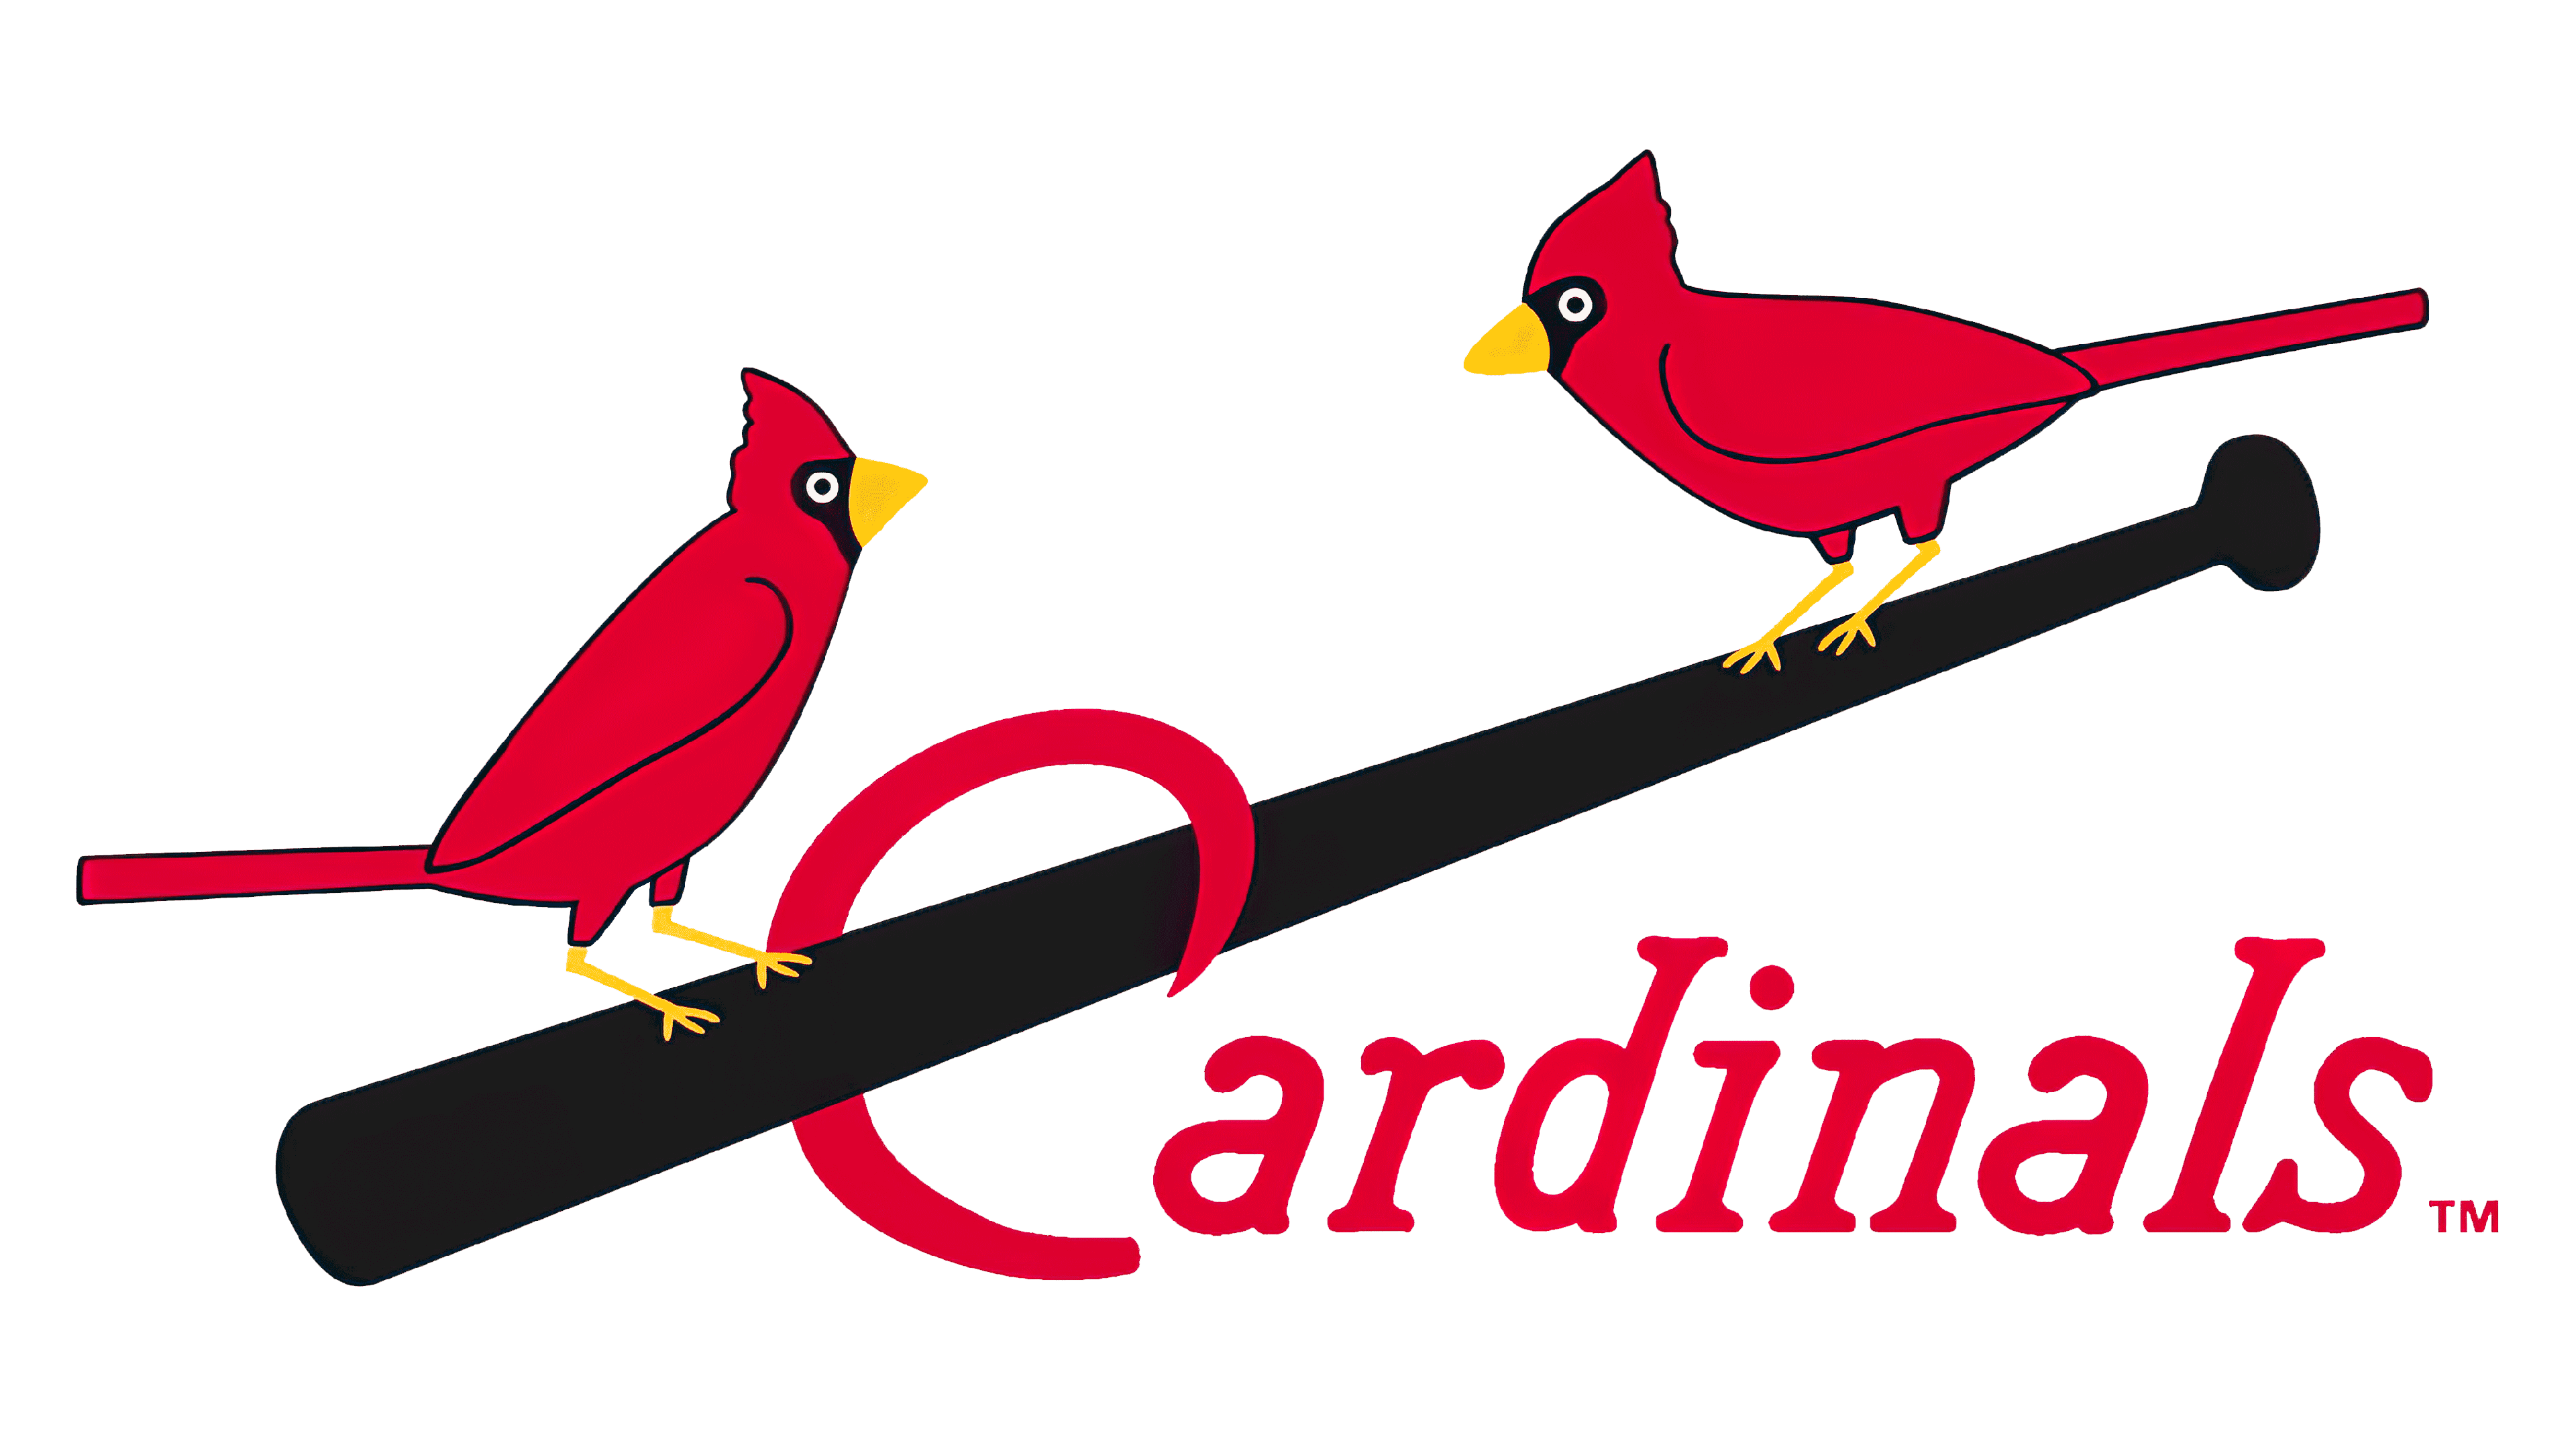 St. Louis Cardinals Logo and sign, new logo meaning and history